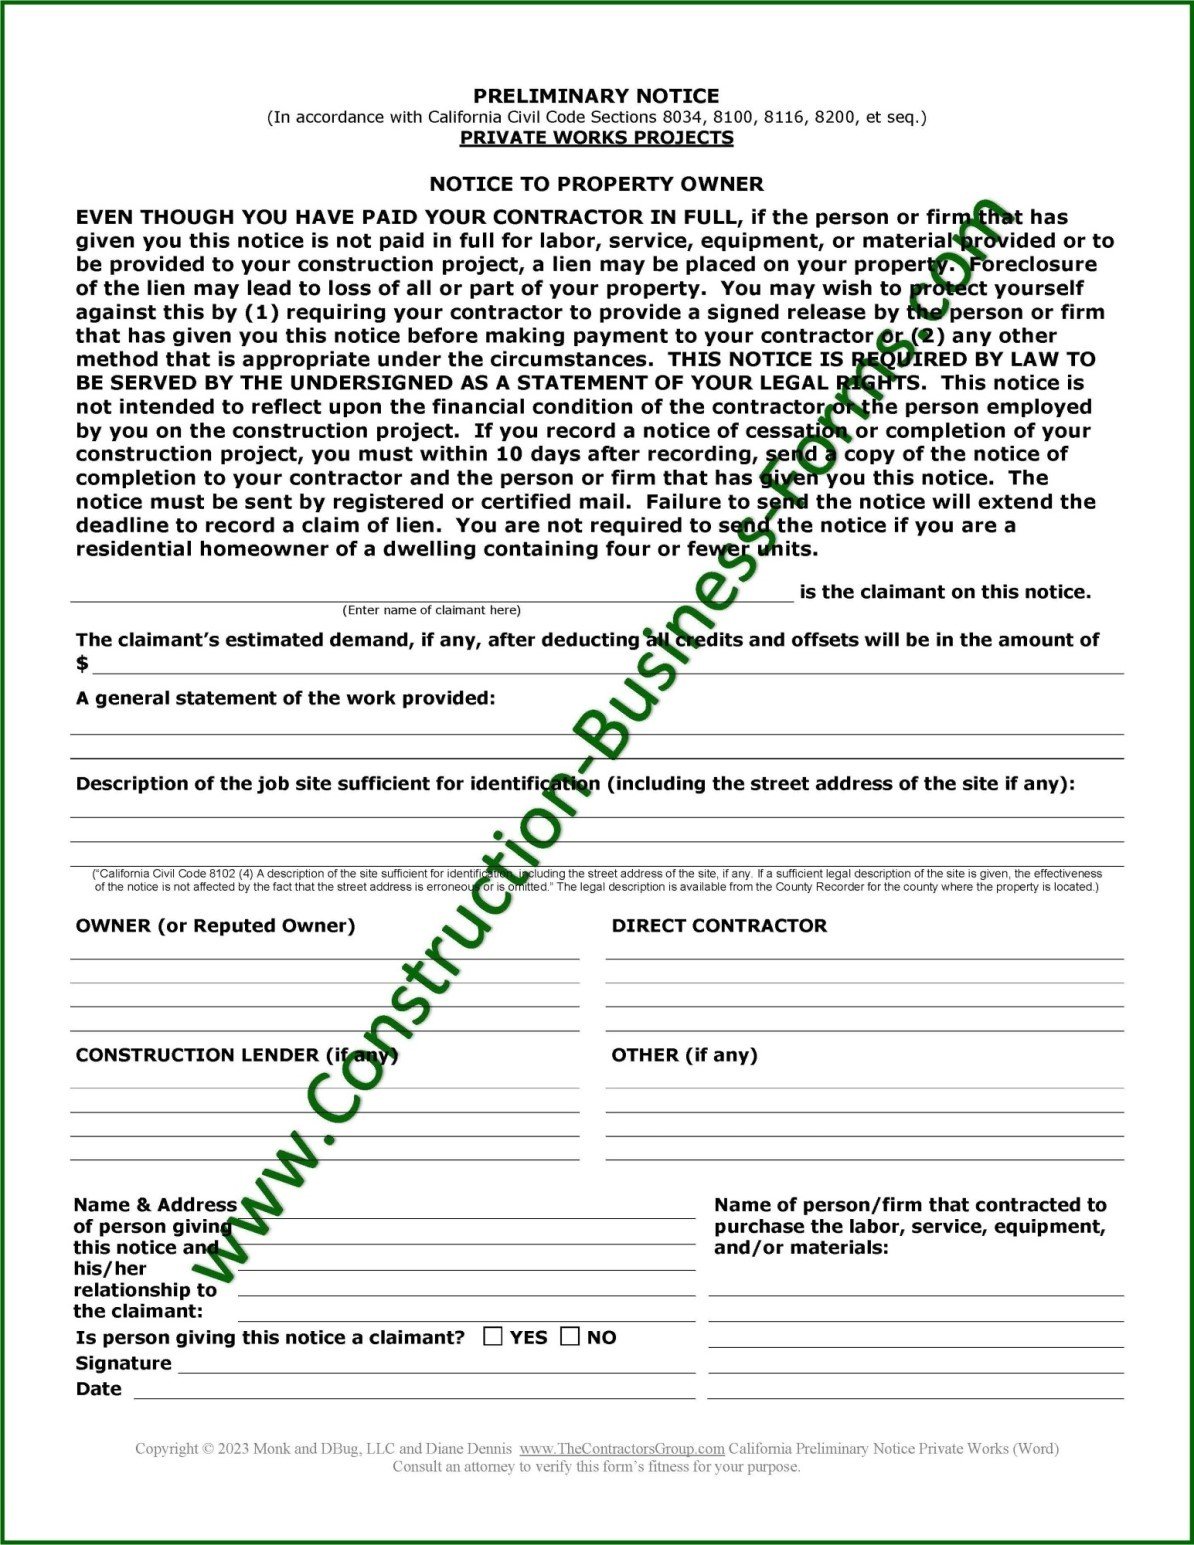 Image of preliminary lien notice with link leading to forms